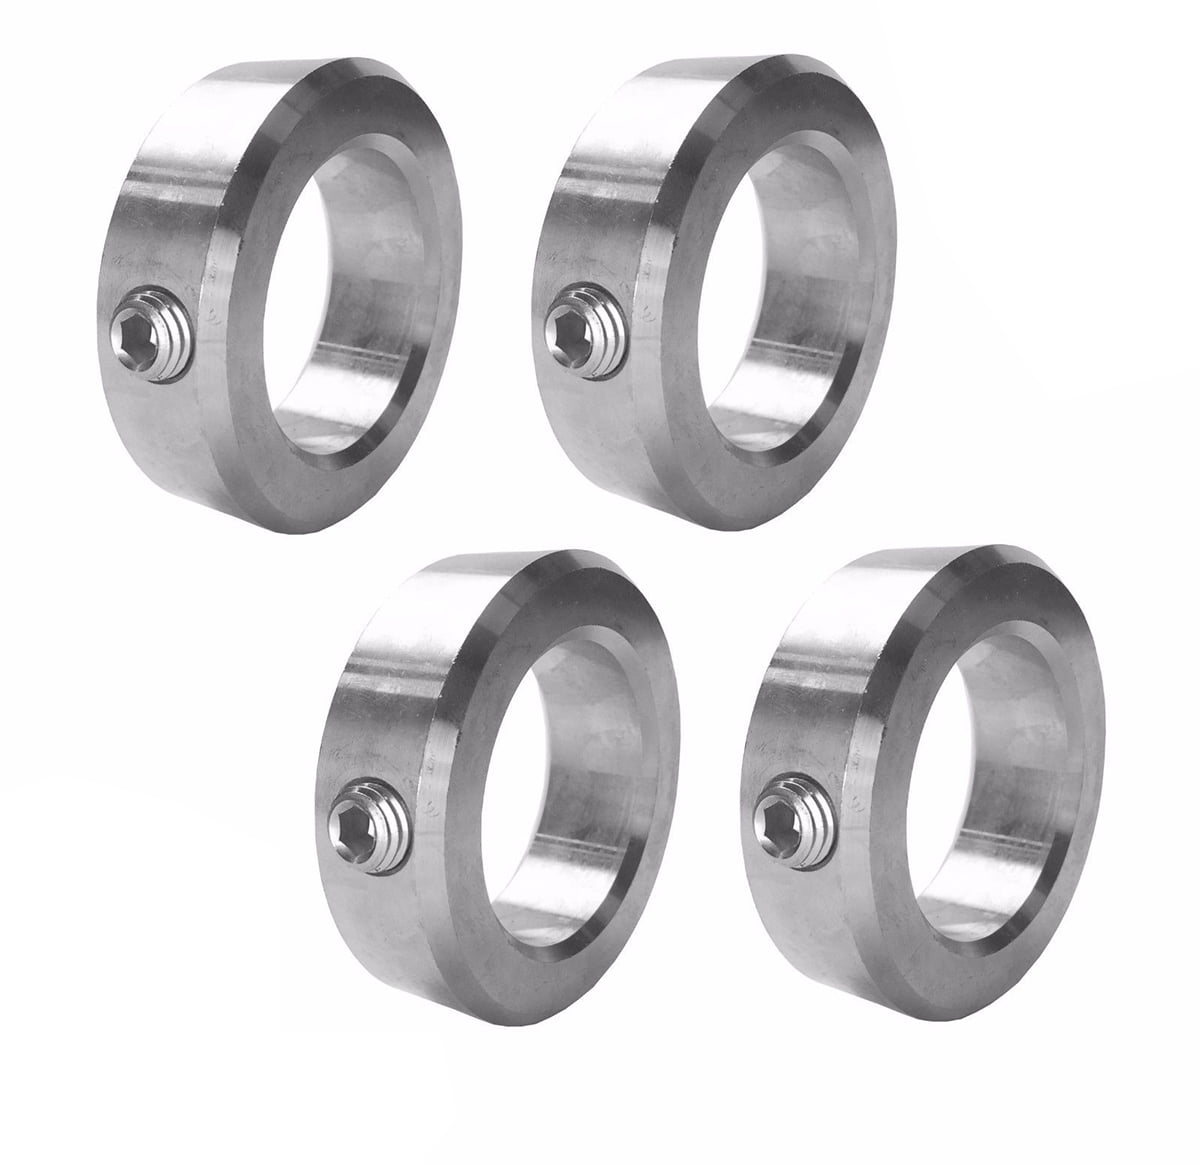 4-Pack Set Screw Steel Zinc-Plated 1 inch Shaft Collar Solid 